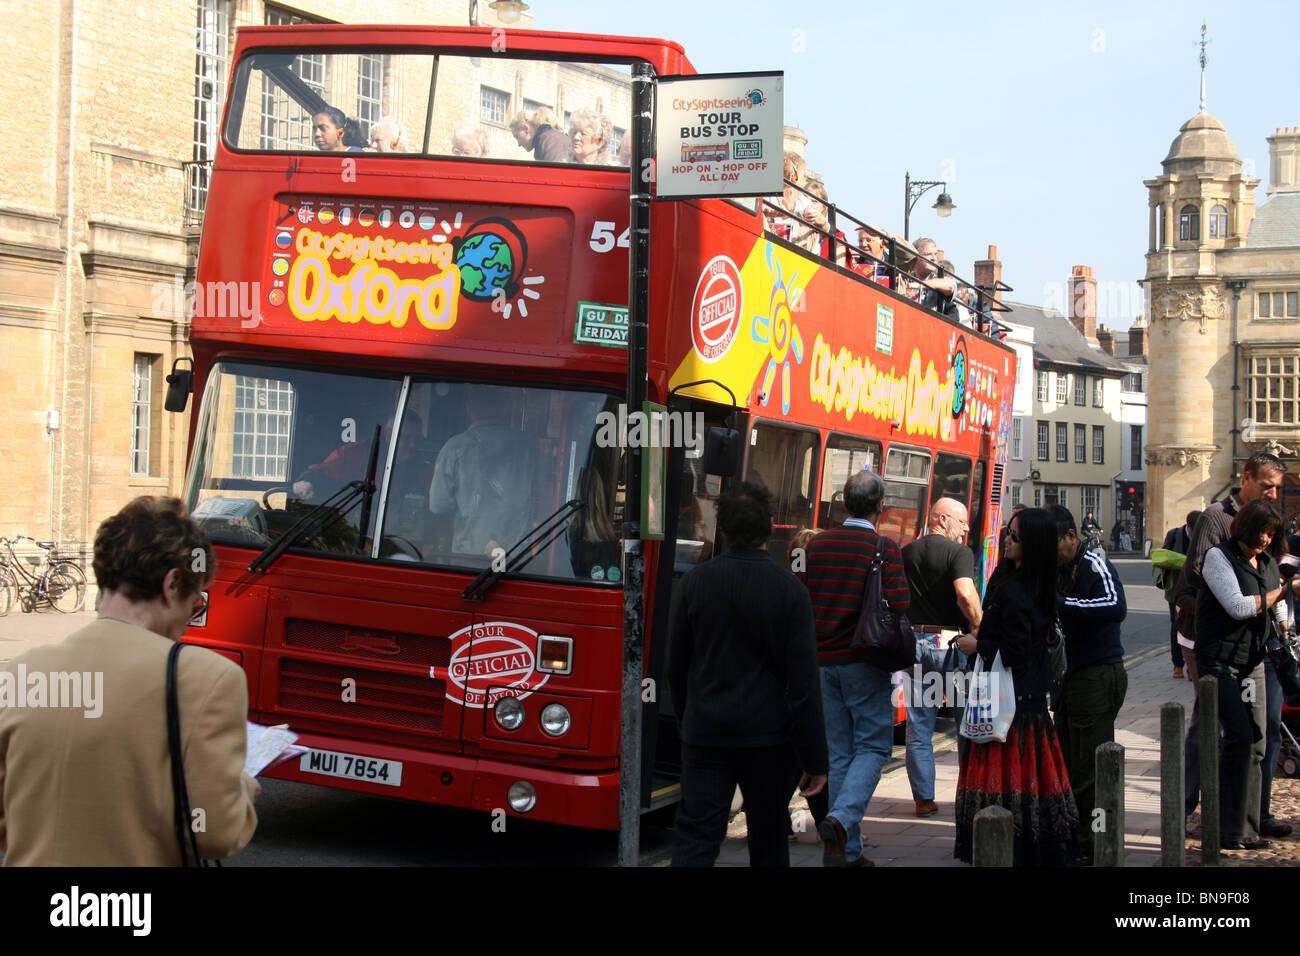 City Sightseeing Oxford Banque D'Images